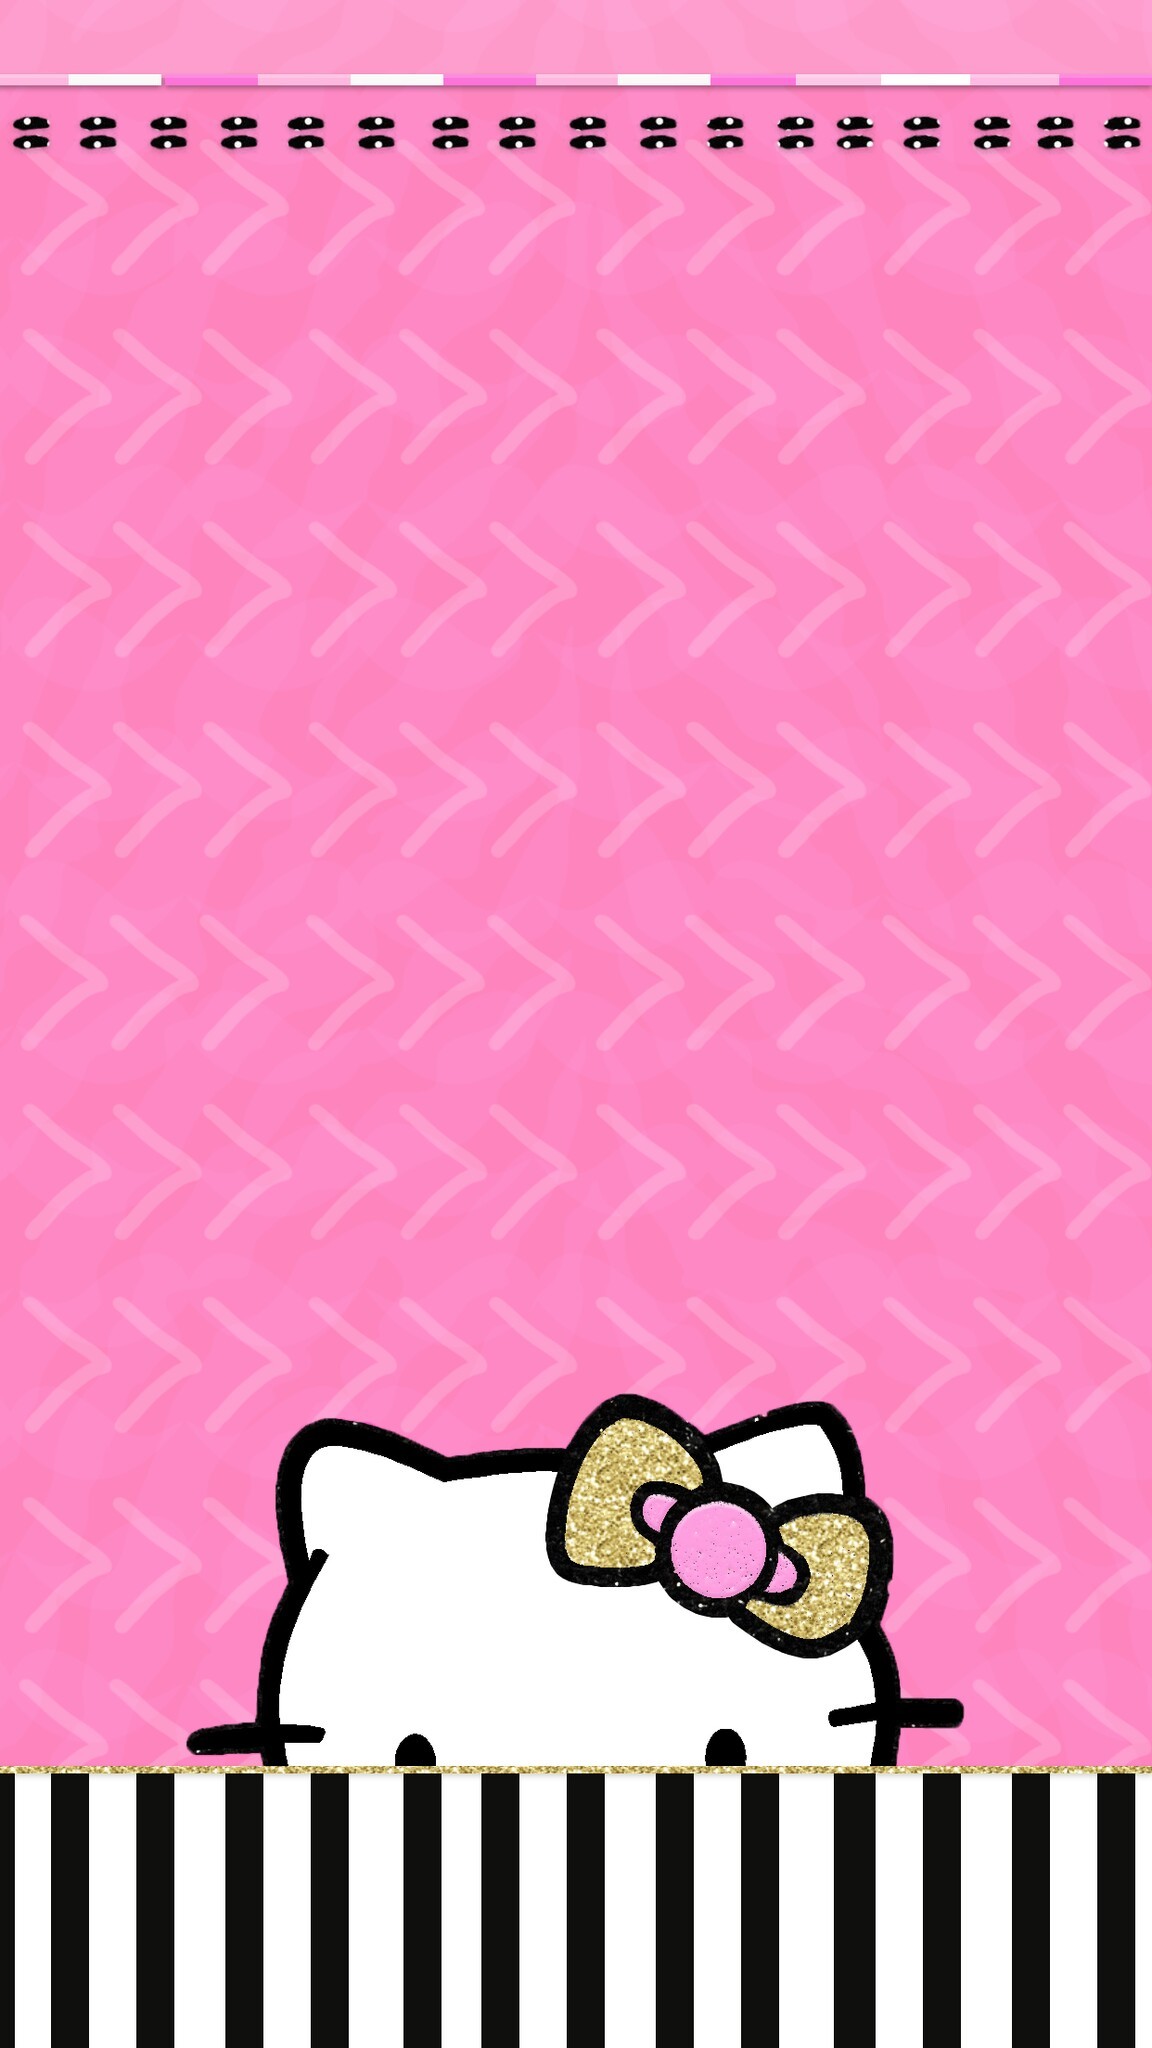 1152x2048 Hello Kitty Wallpaper, Phone Wallpapers, Wallpaper Backgrounds, Iphone 7,  Ash, Chevron, Wallpaper For Phone, Phones, Wallpapers